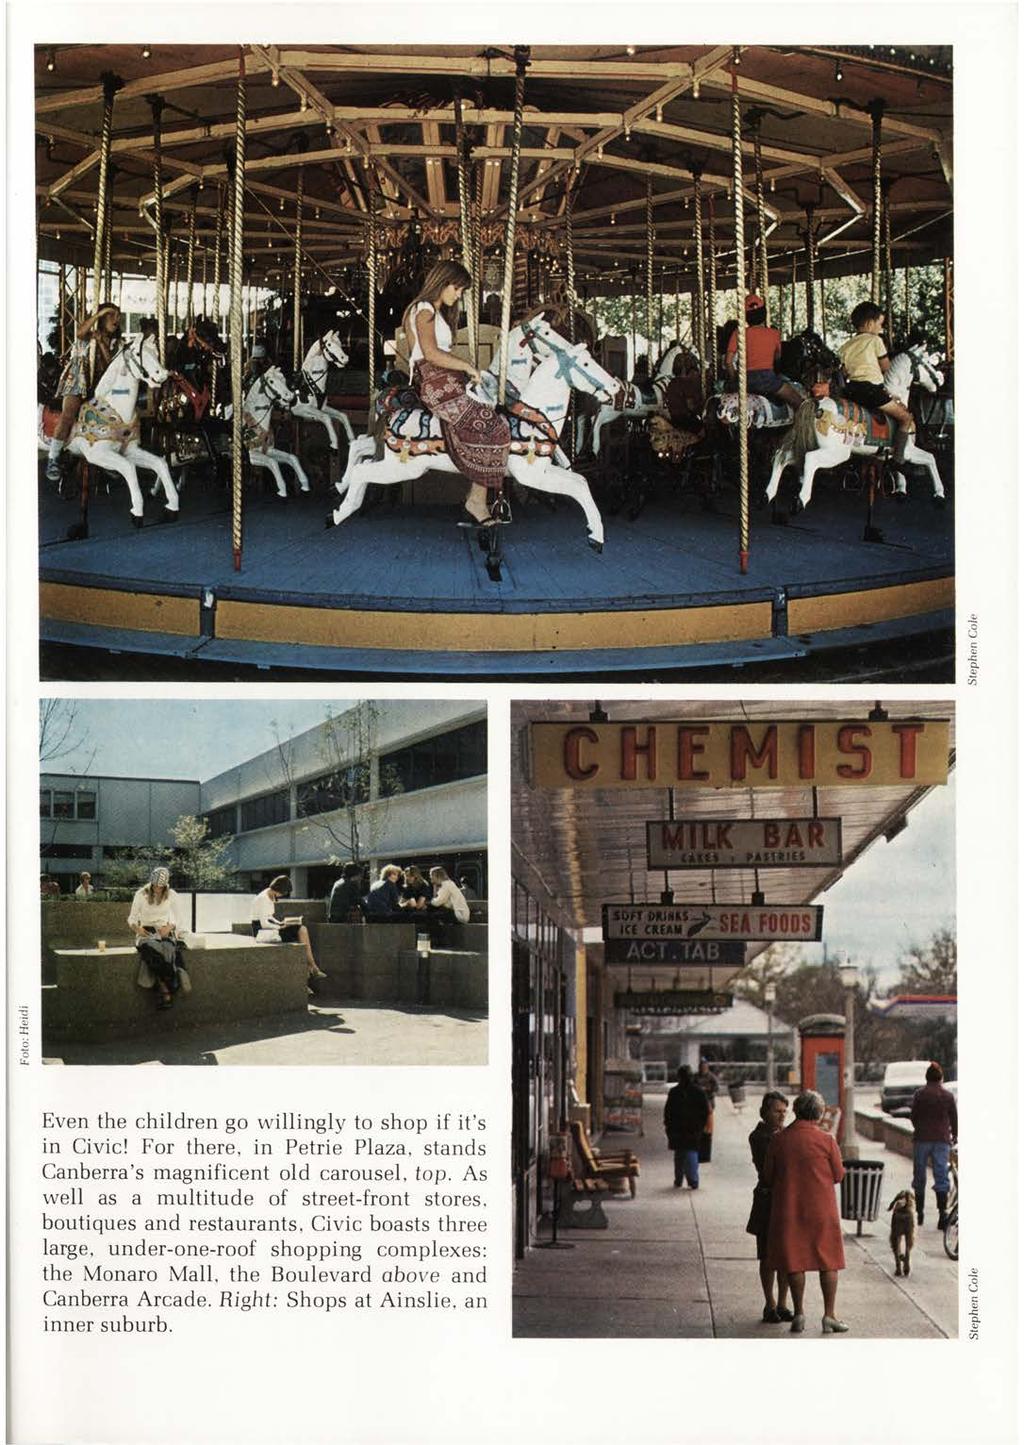 Even the children go willingly to shop if it s in Civic! For there, in Petrie Plaza, stands Canberra s magnificent old carousel, top.